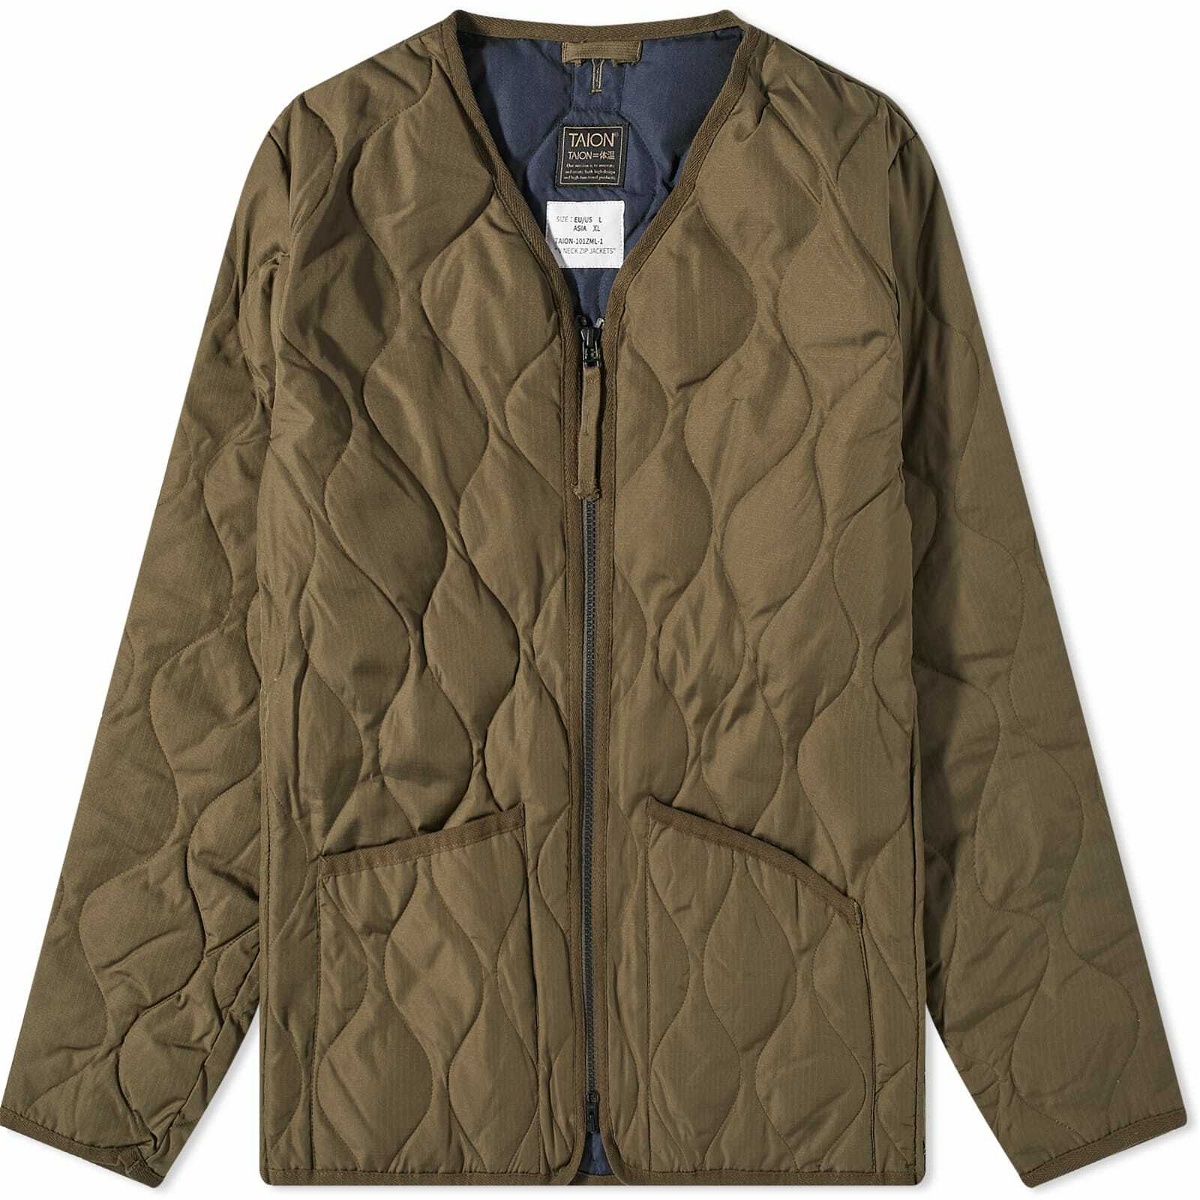 Taion Men's Military Zip Down Jacket in Dark Olive Taion Extra